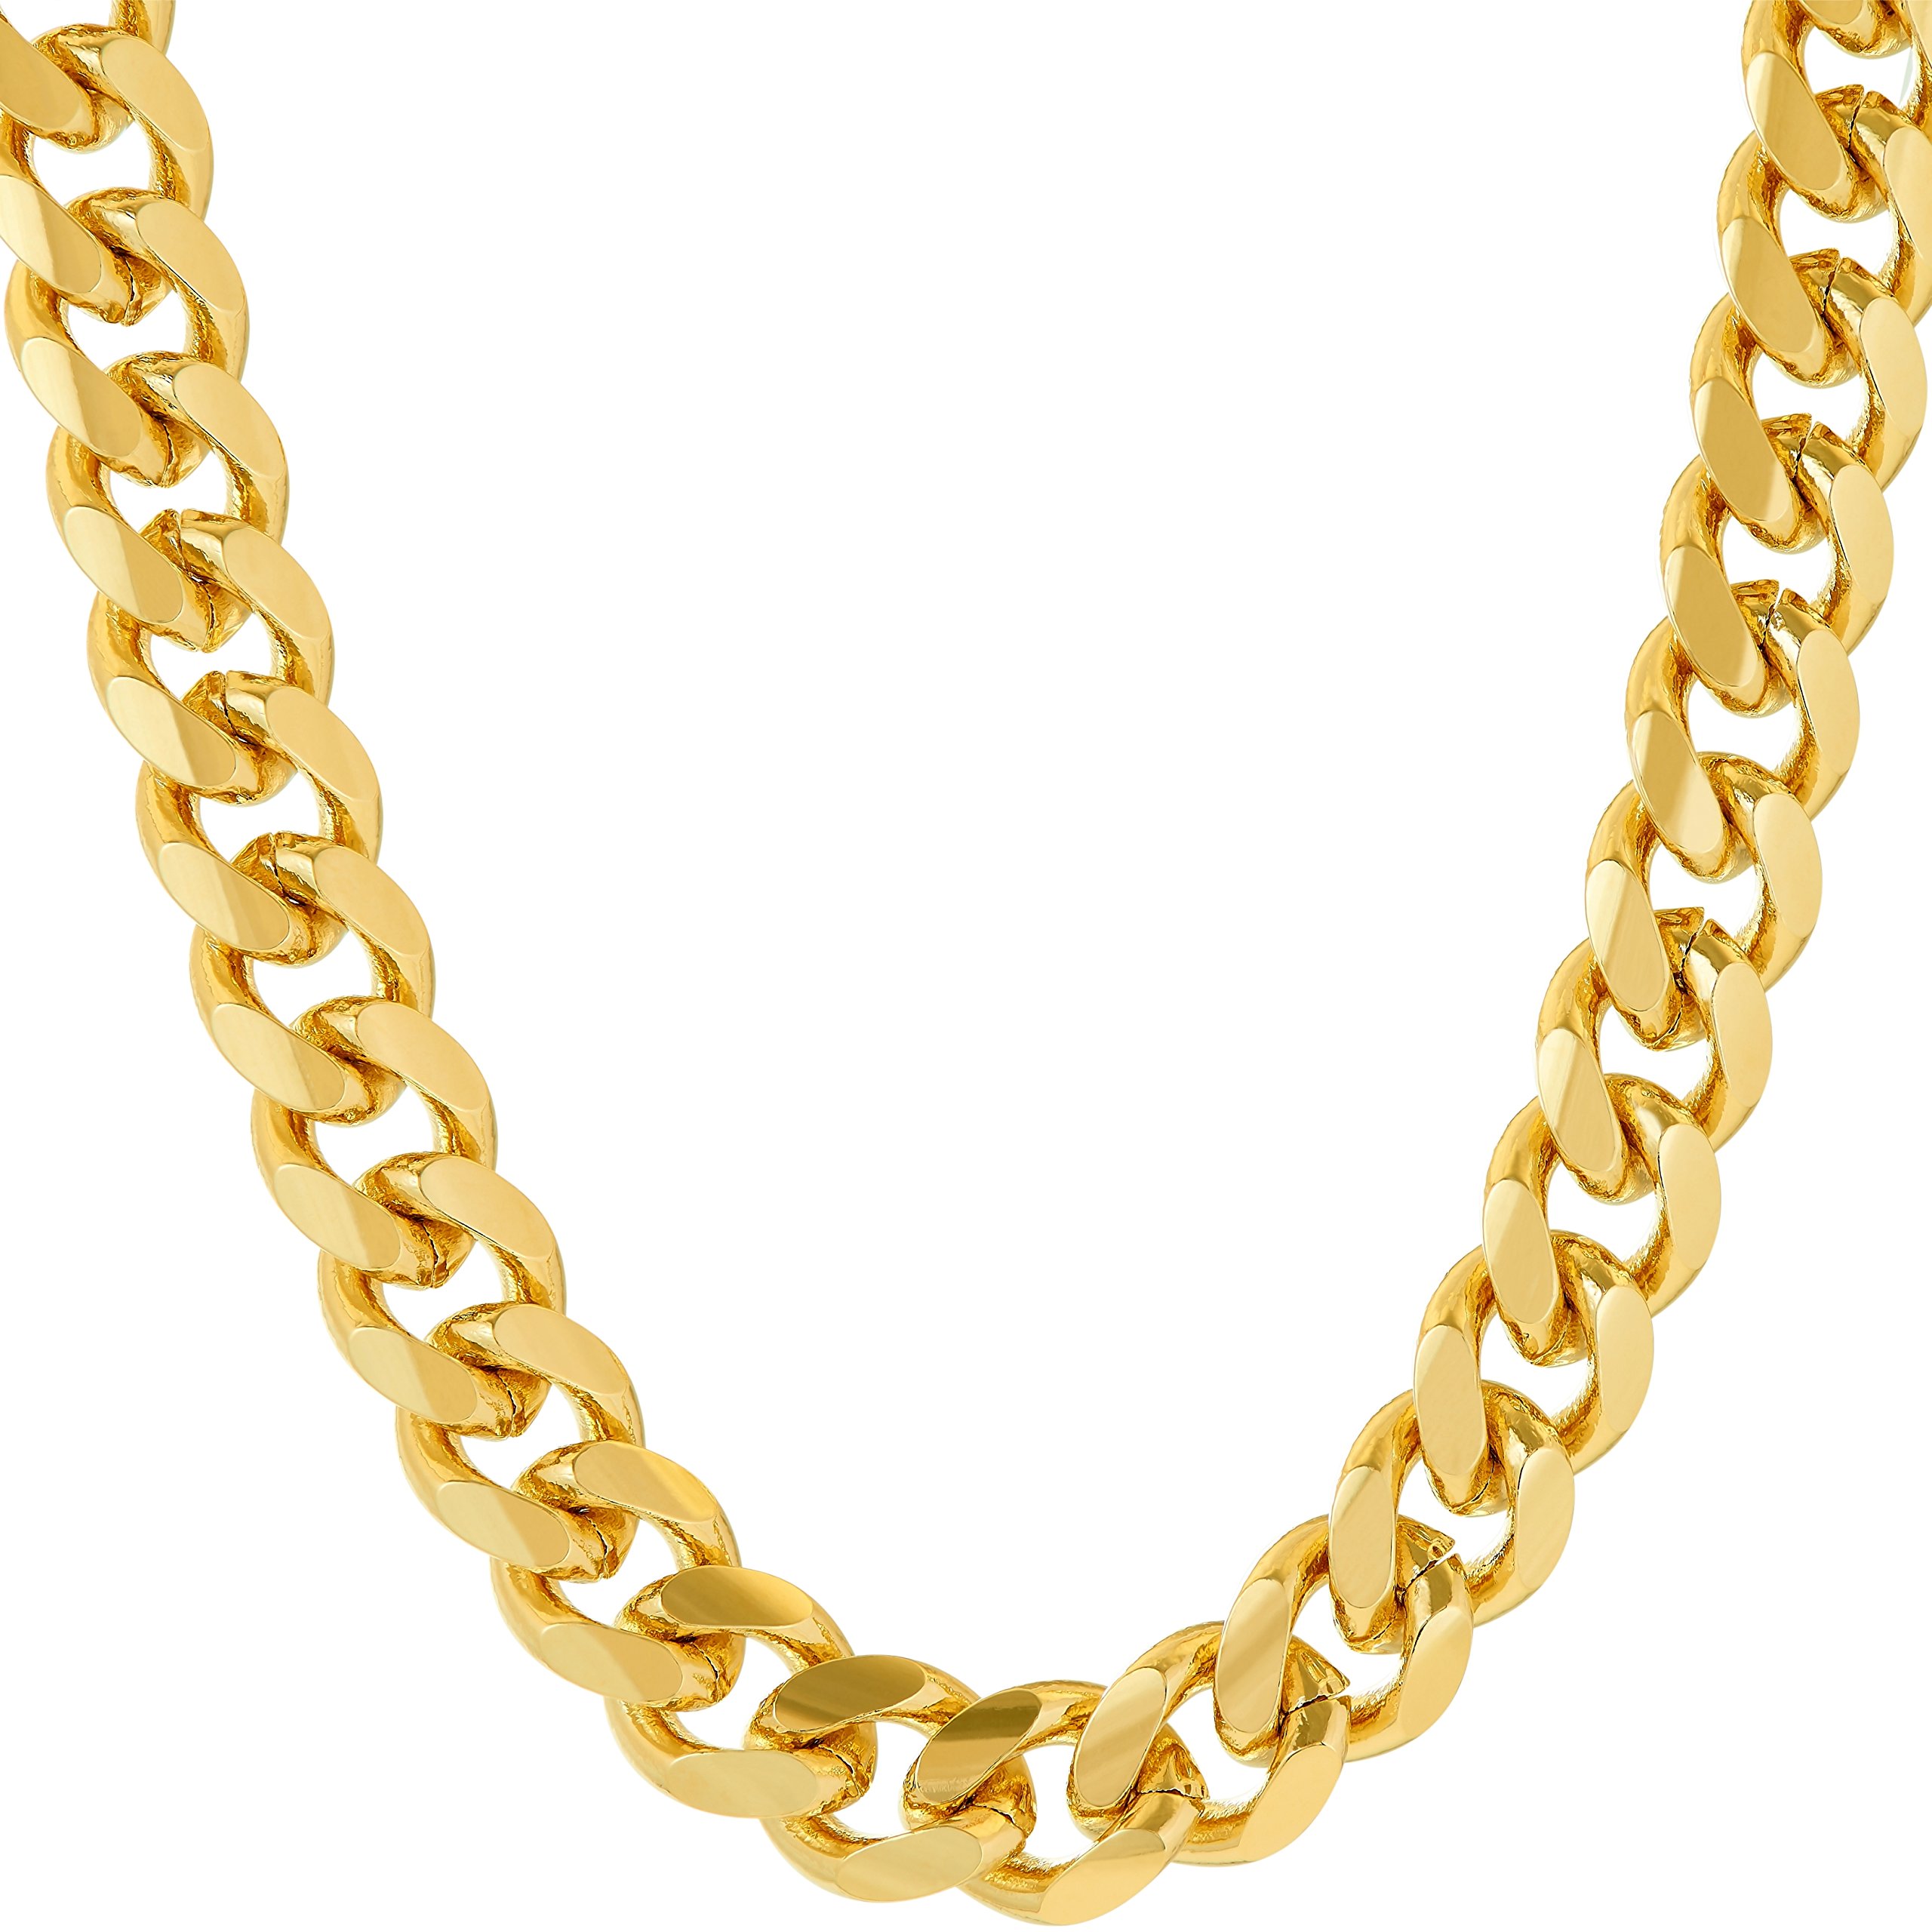 LIFETIME JEWELRY 9mm Miami Curb Cuban Link Chain Necklace 24k Gold Plated